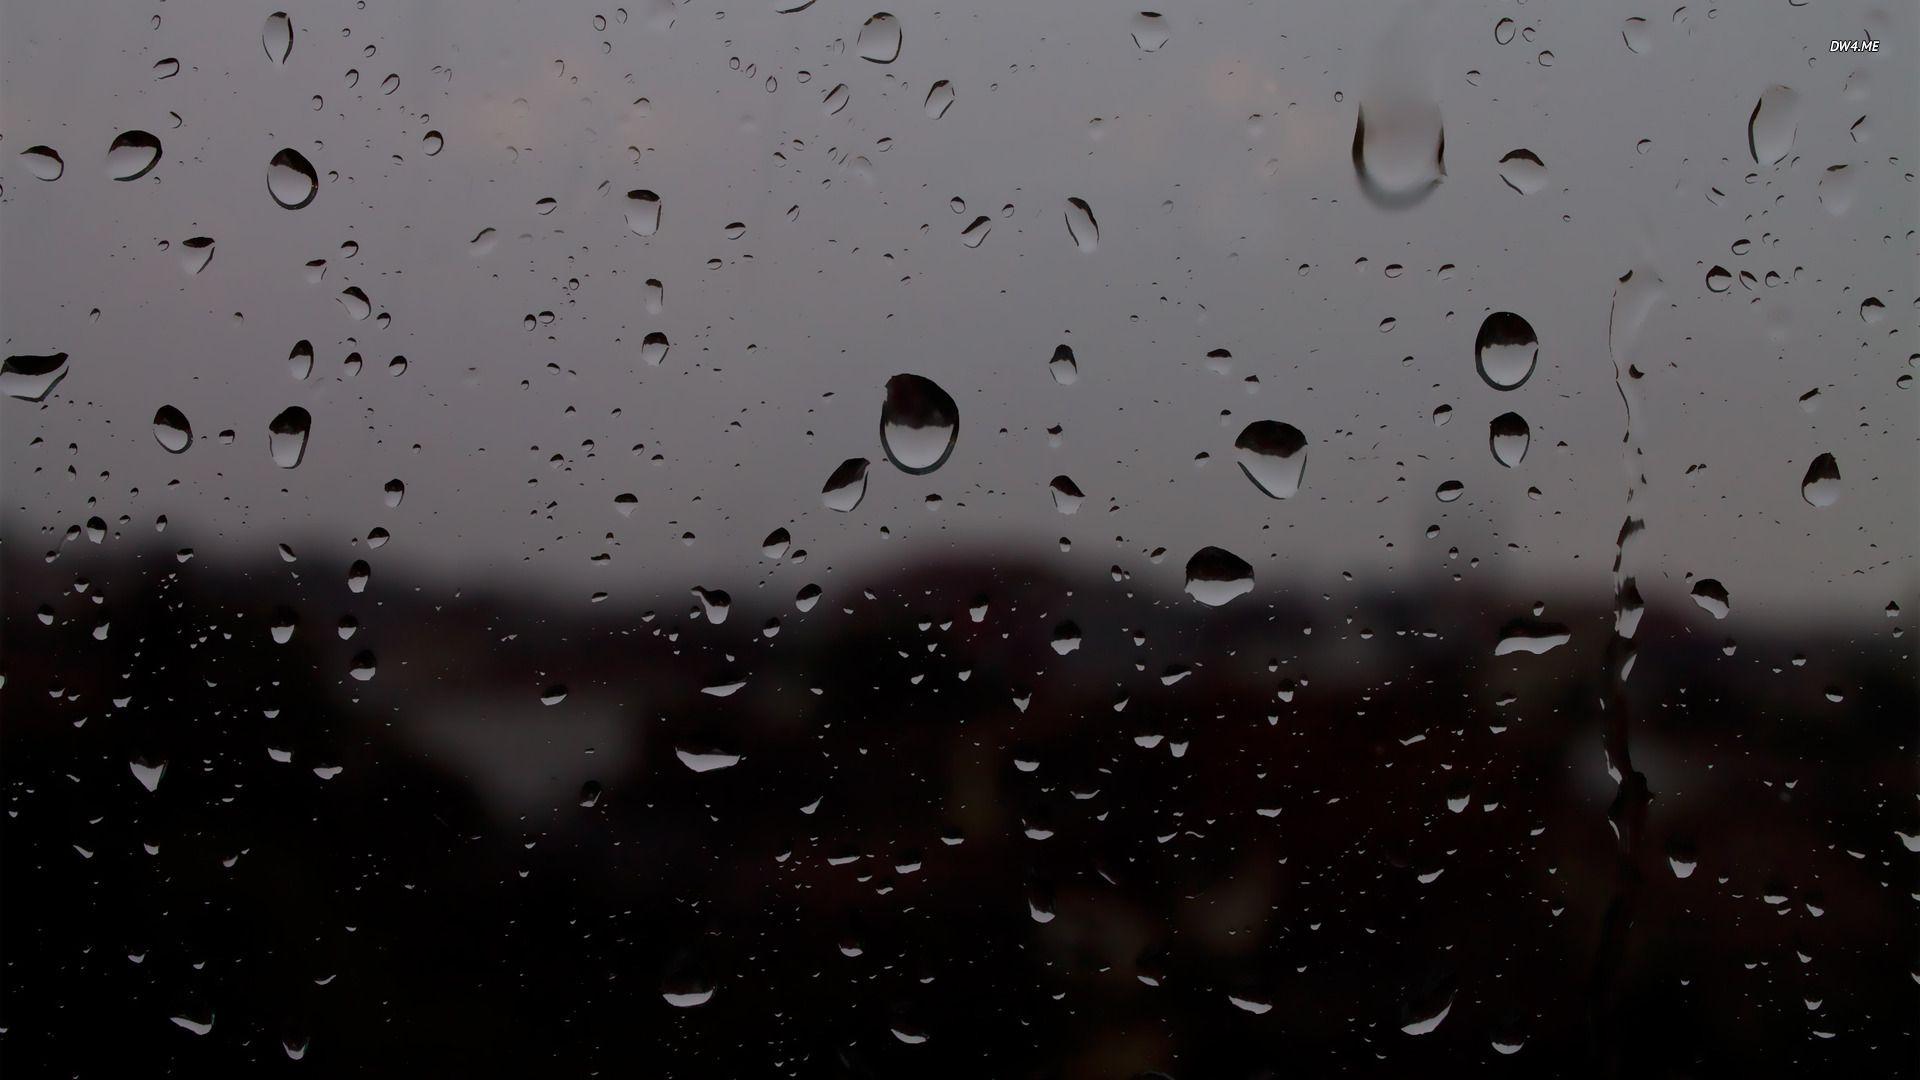 Wallpapers Of Raindrops